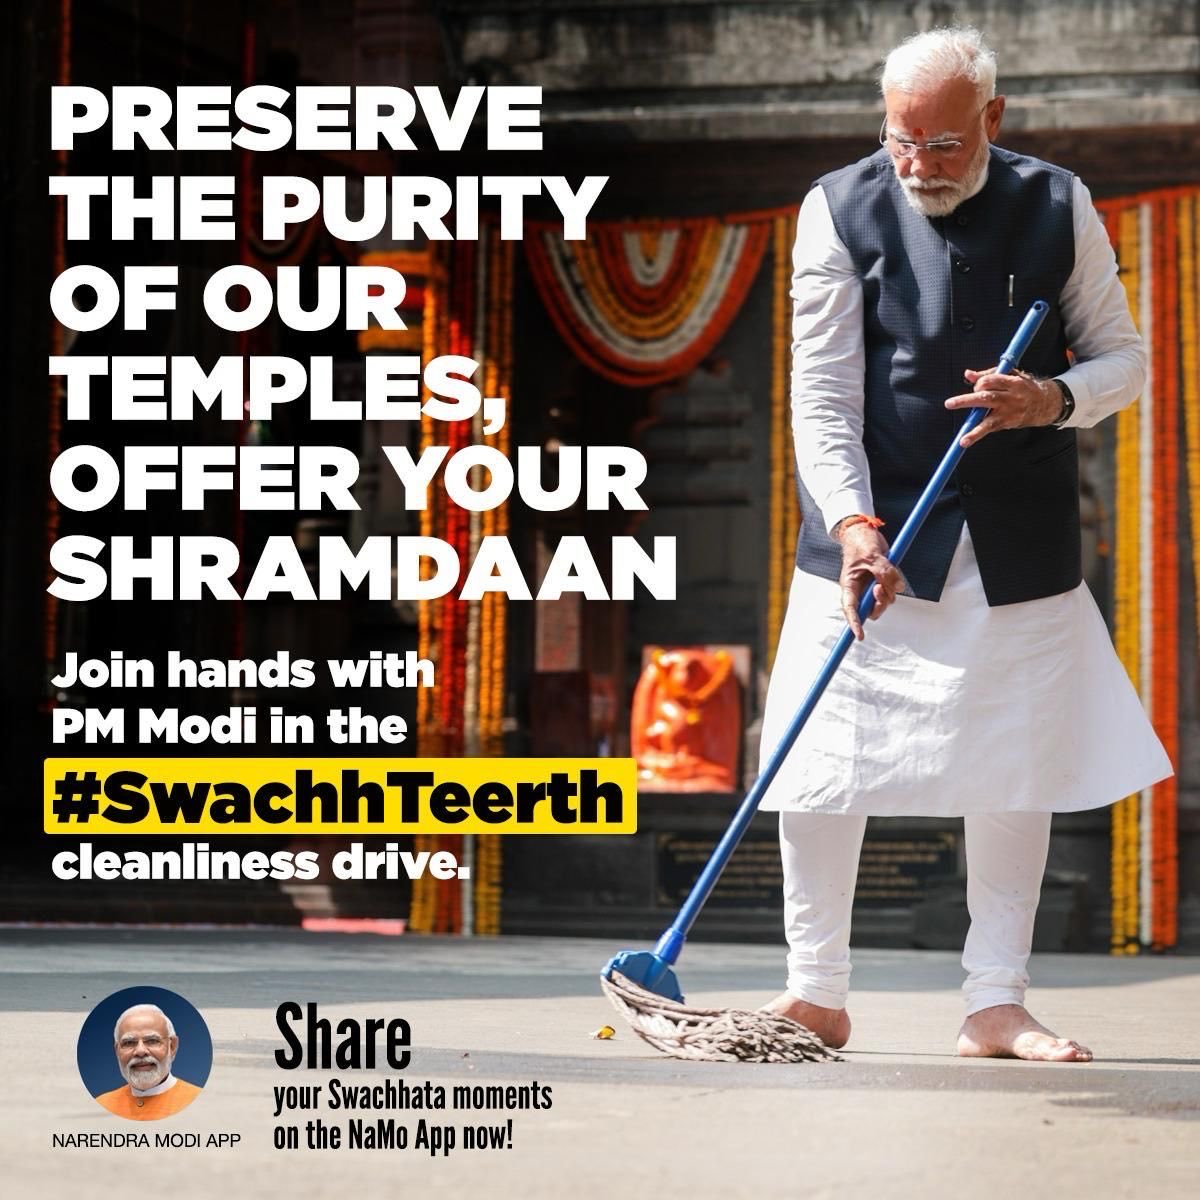 Offer your Services!
Clean temples in your area from tomorrow till 22nd Jan

#SwachhTeerth #SwachhtaHiSewa